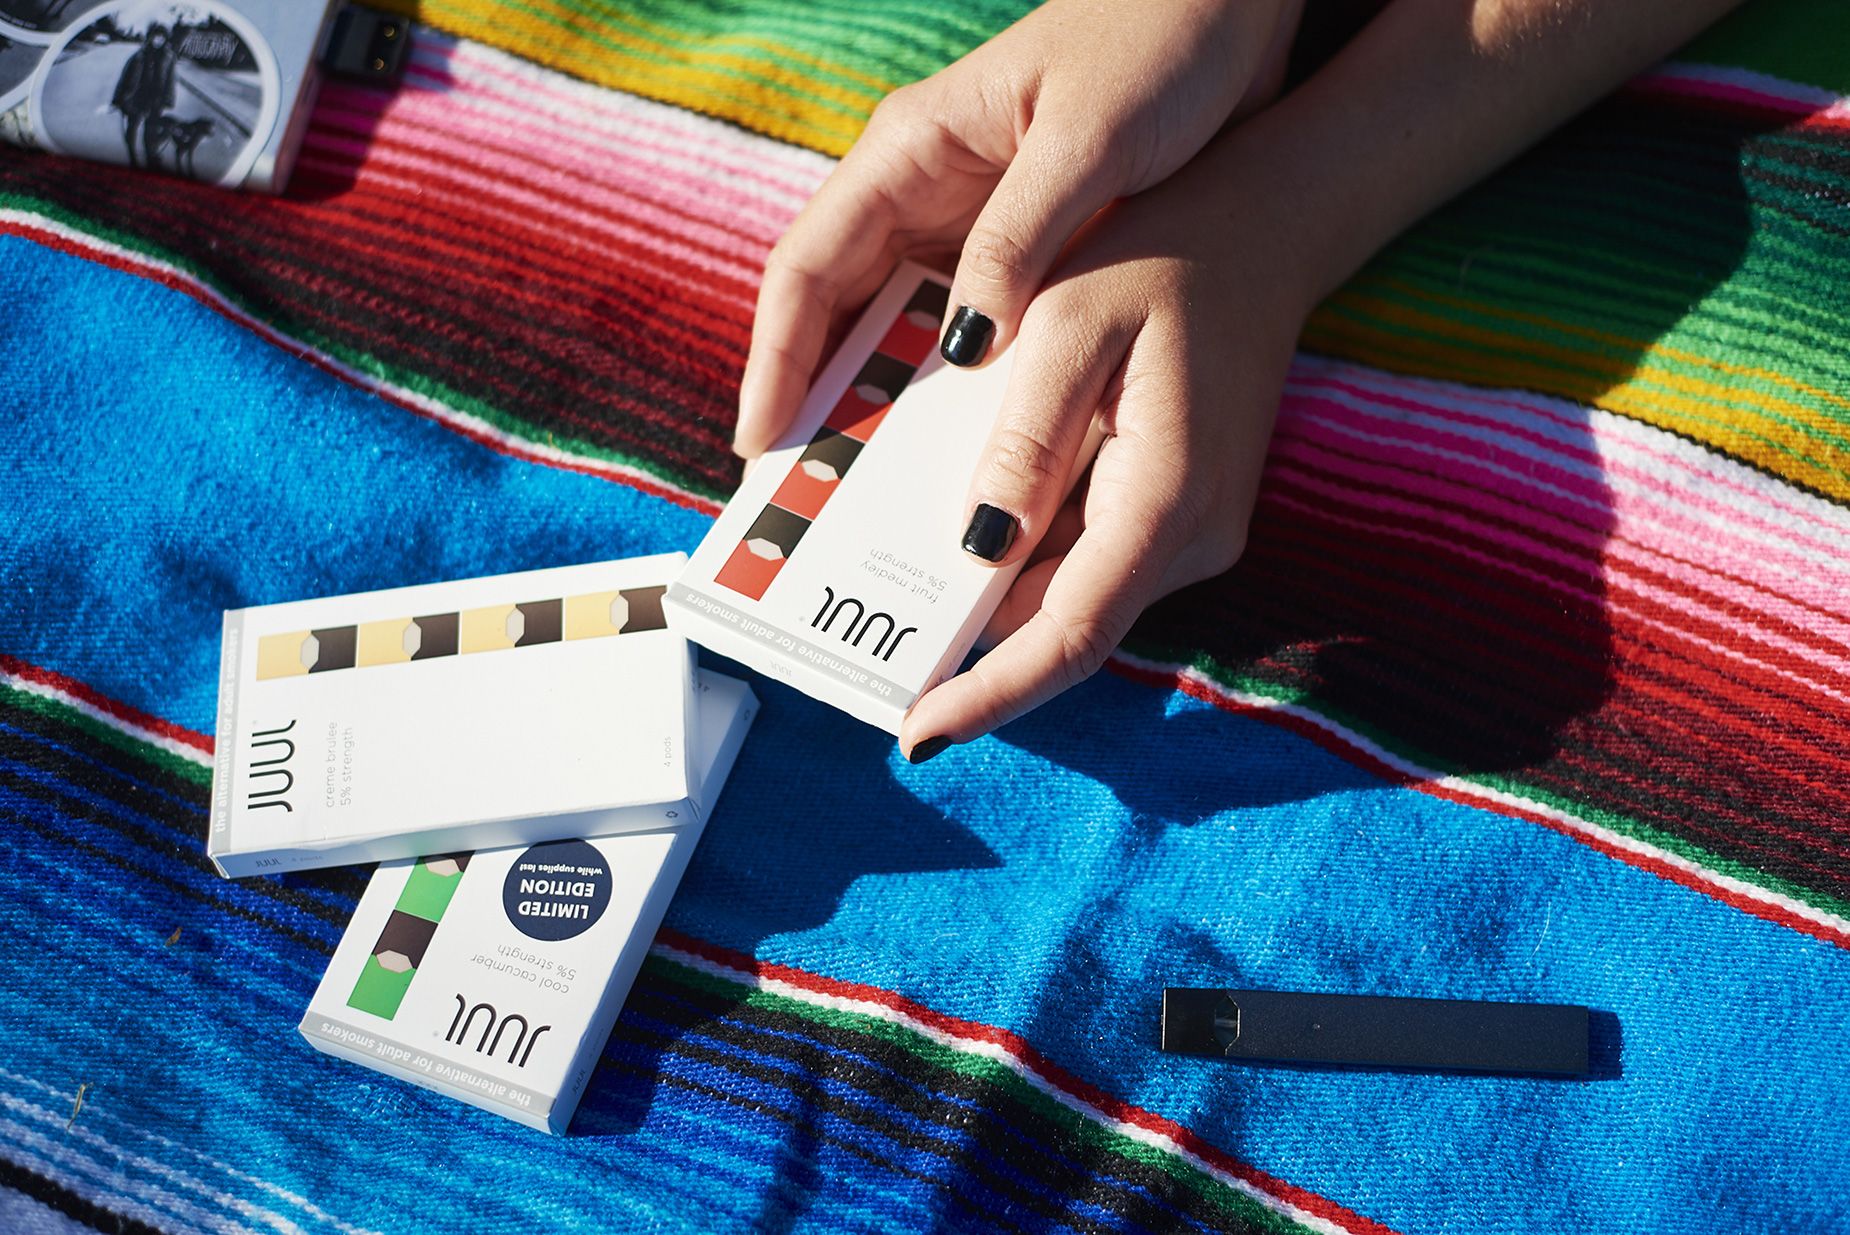 Juul was compared to the Apple iPhone, thanks to its streamlined design and clean packaging.